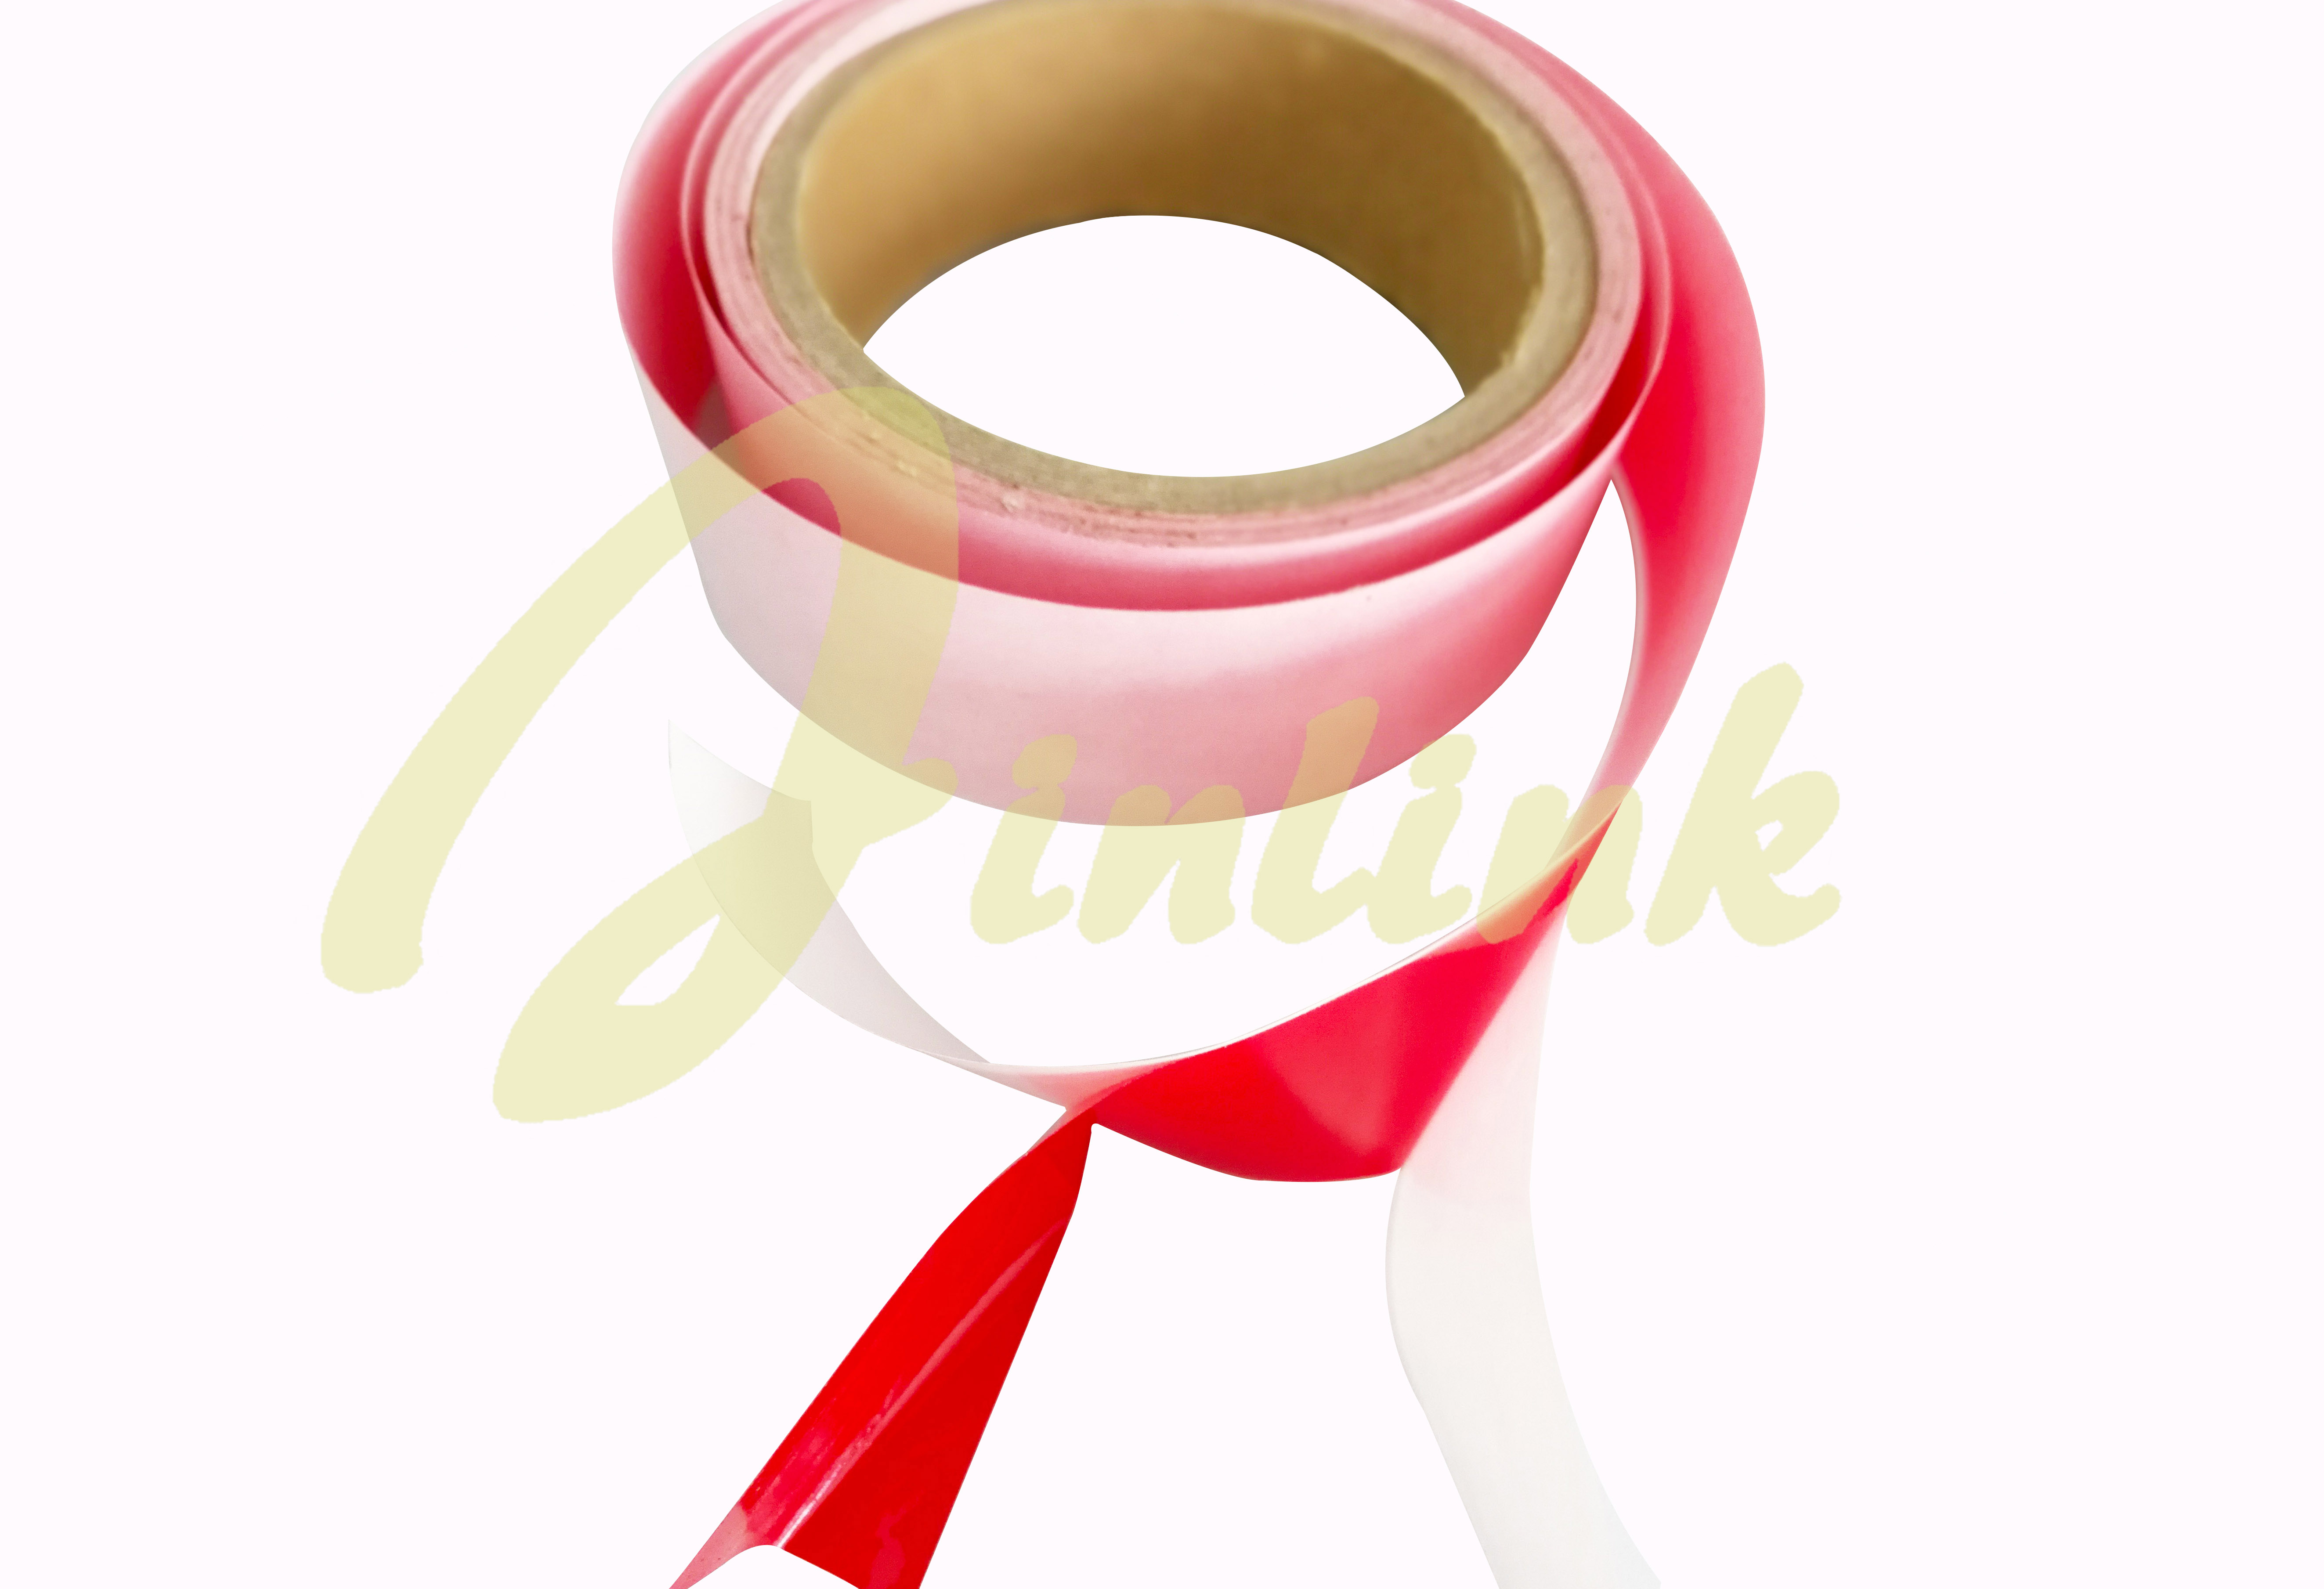 Double Sided Tamper Evident Security Tape For Bags